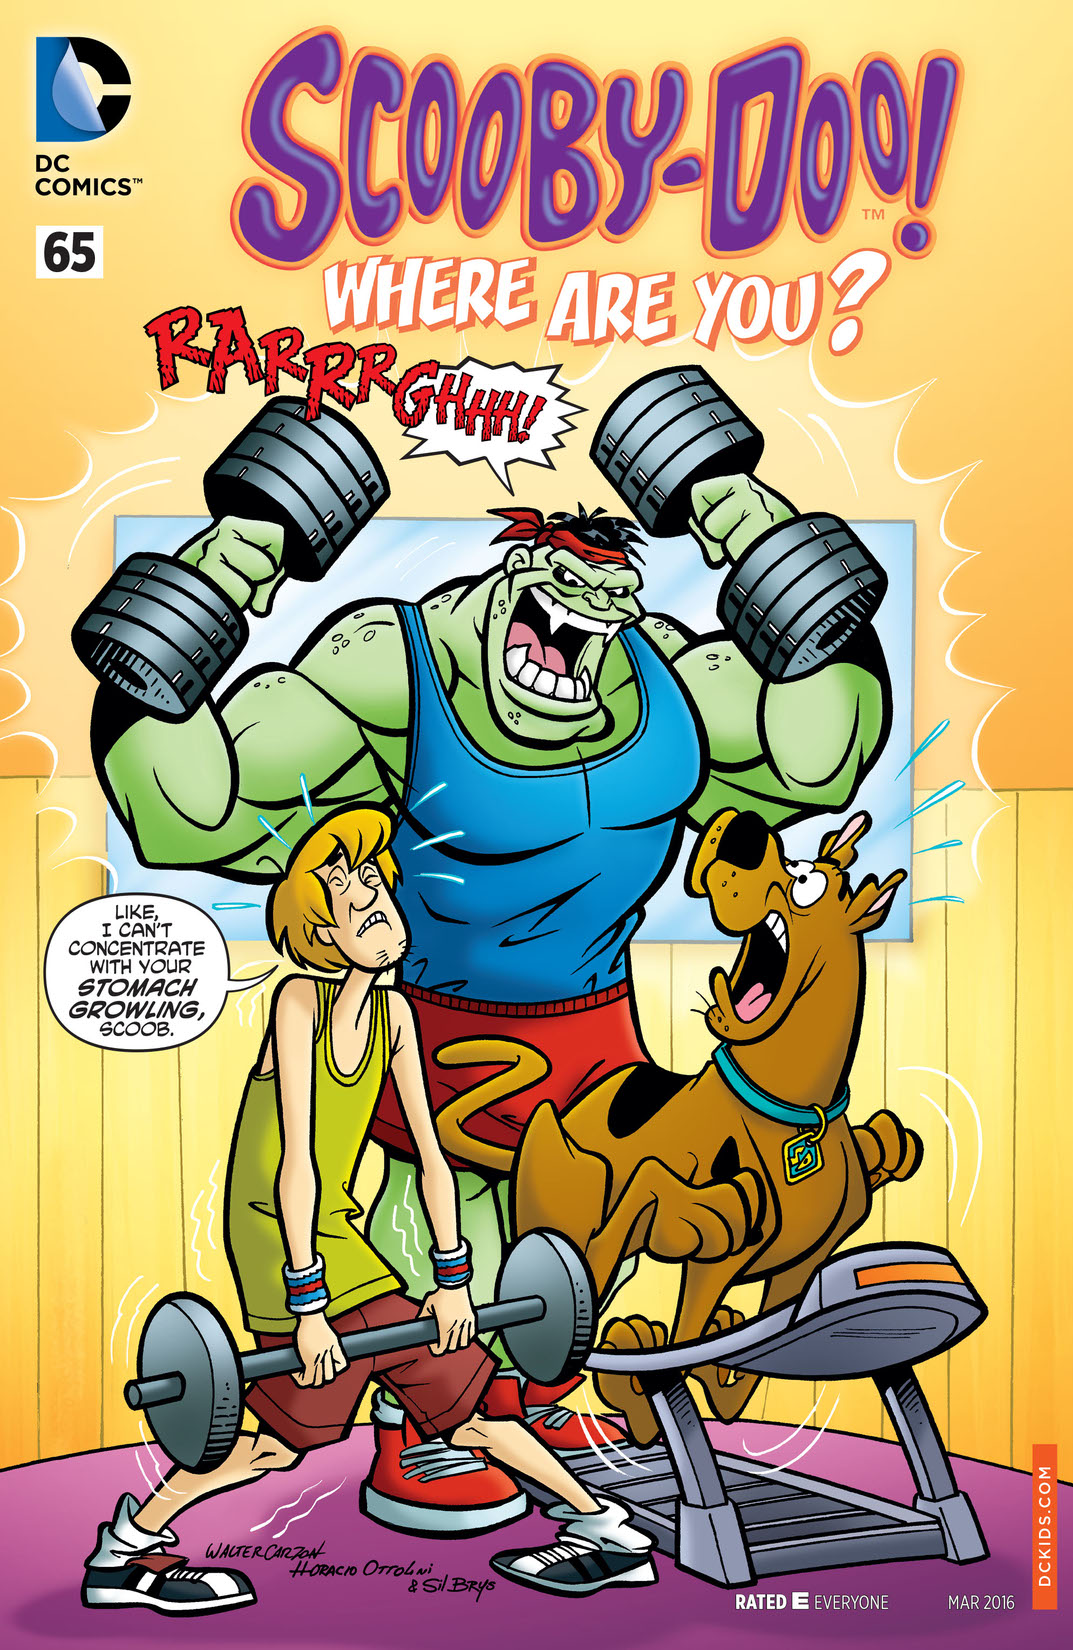 Scooby-Doo, Where Are You? #65 preview images